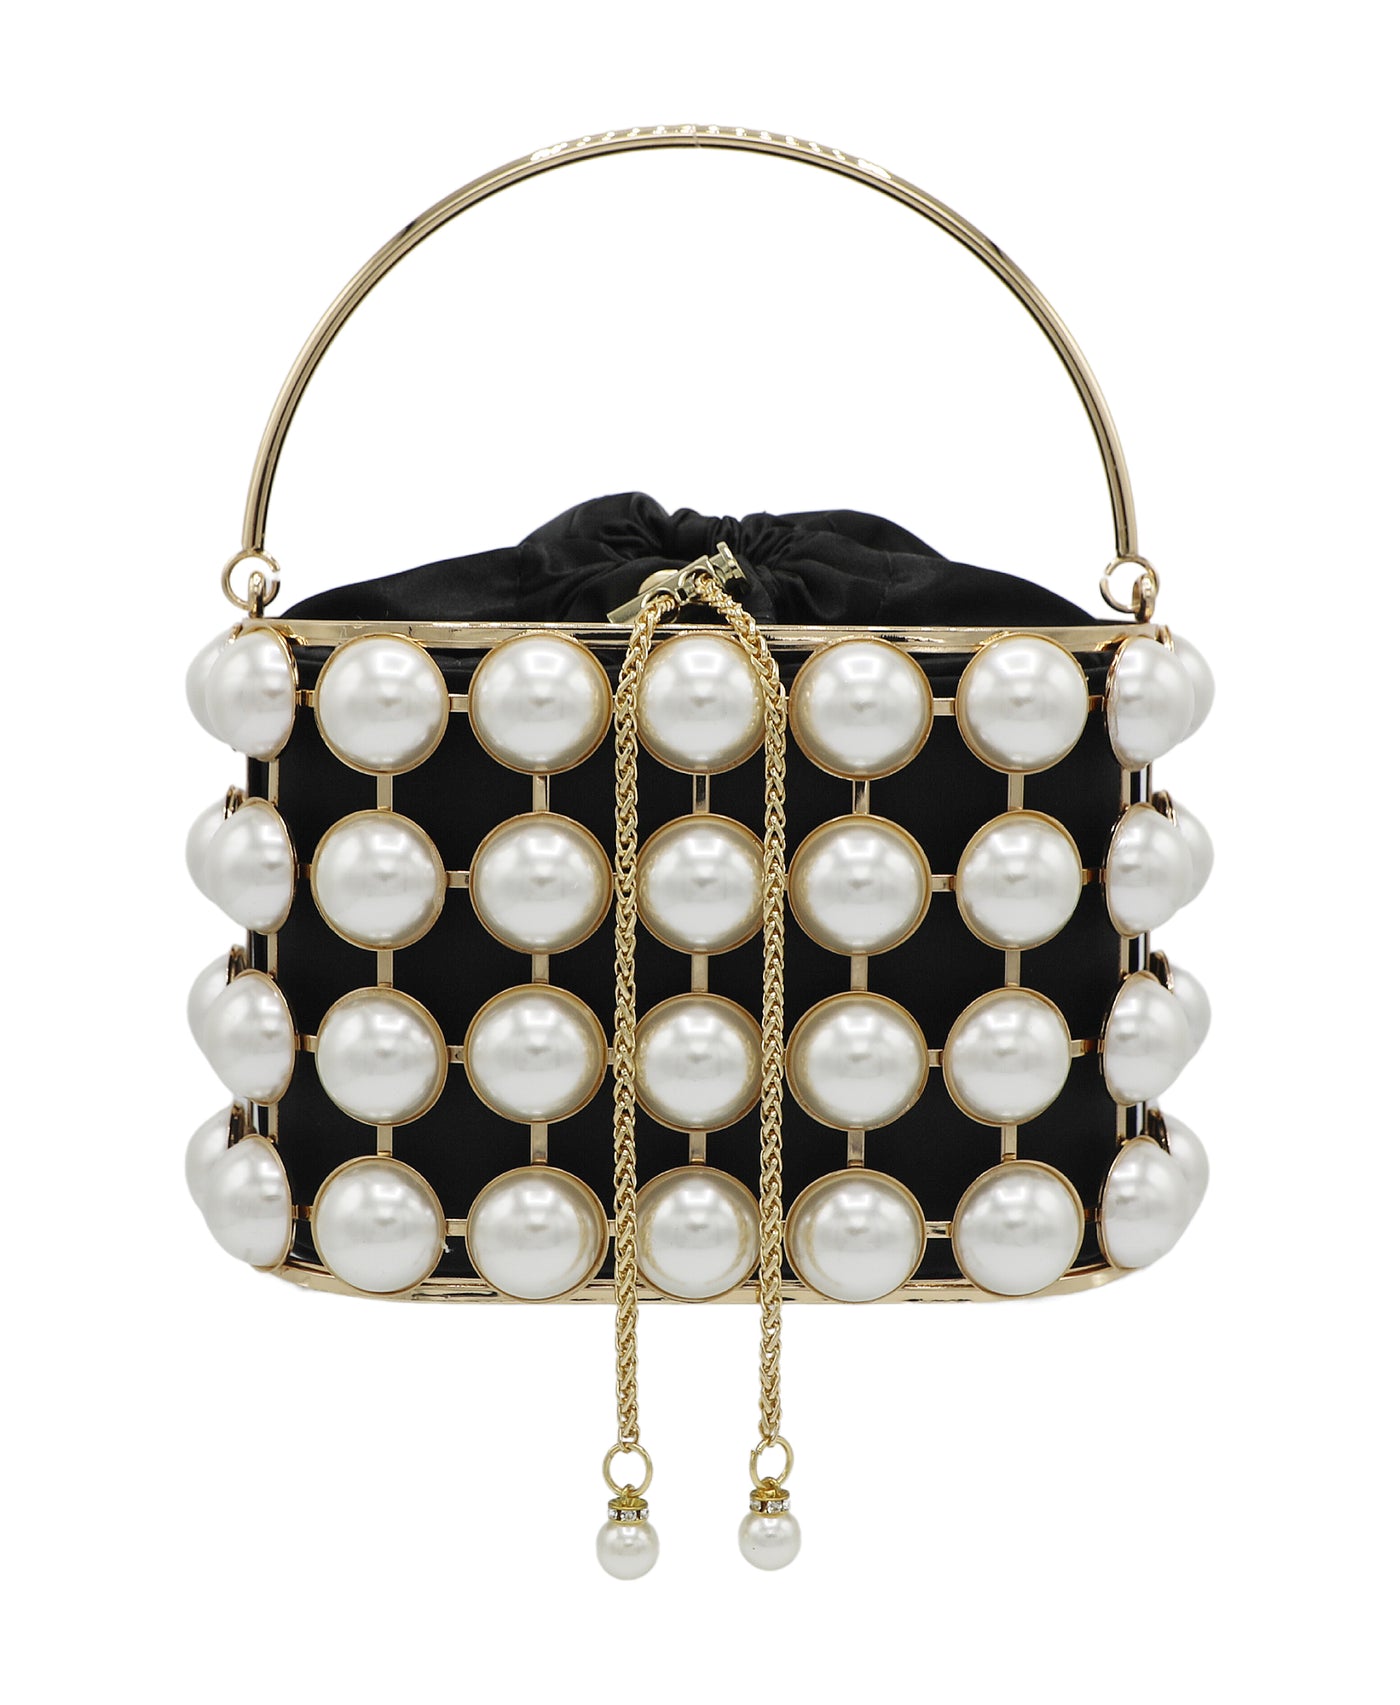 Faux Pearl Bucket Evening Bag image 1